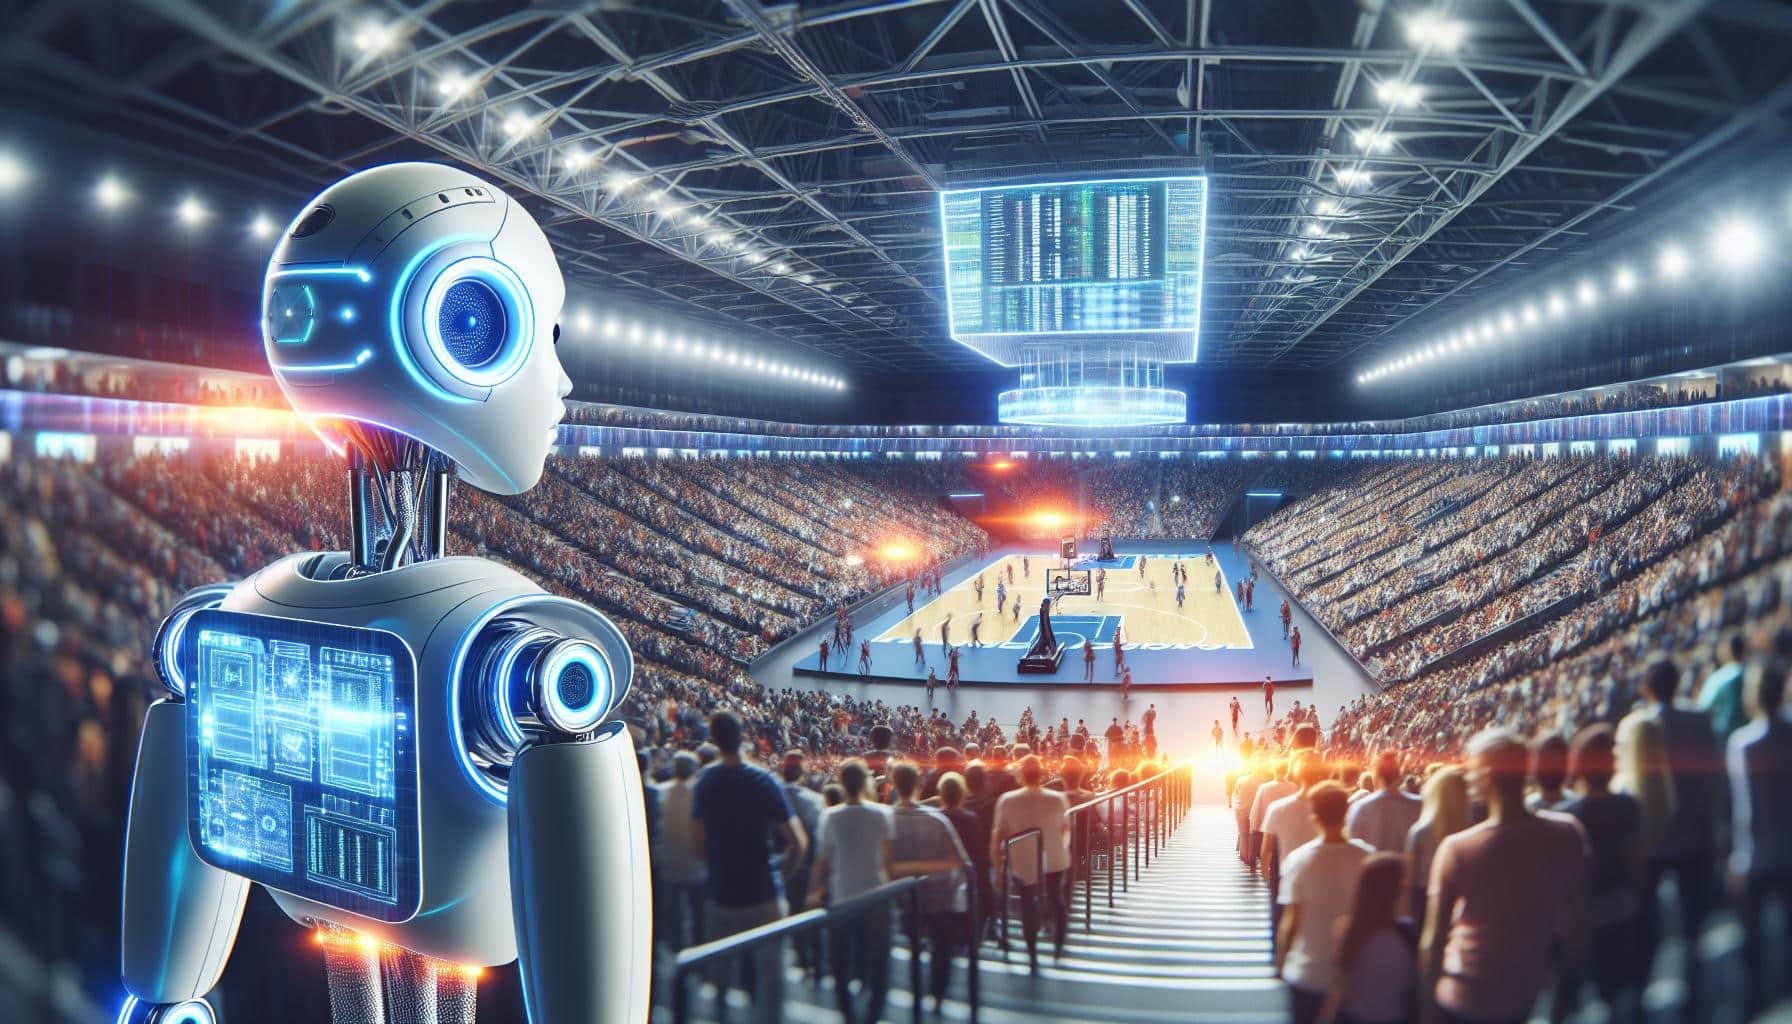 AI Technology Screens and Greets Fans at Ball Arena | FinOracle